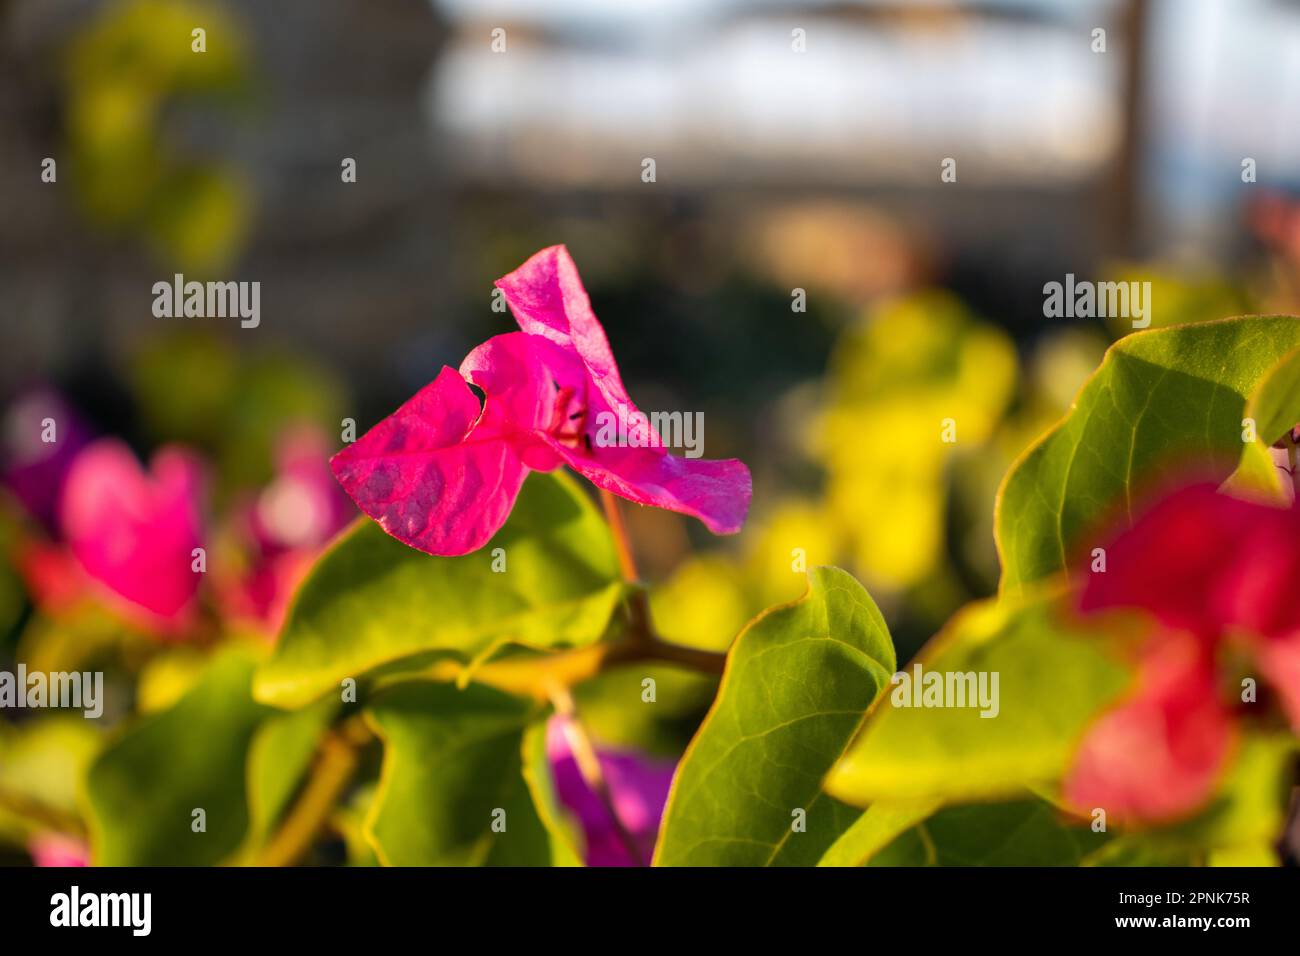 single bright pink Bougainvillea flowers with green leaves in the background Stock Photo